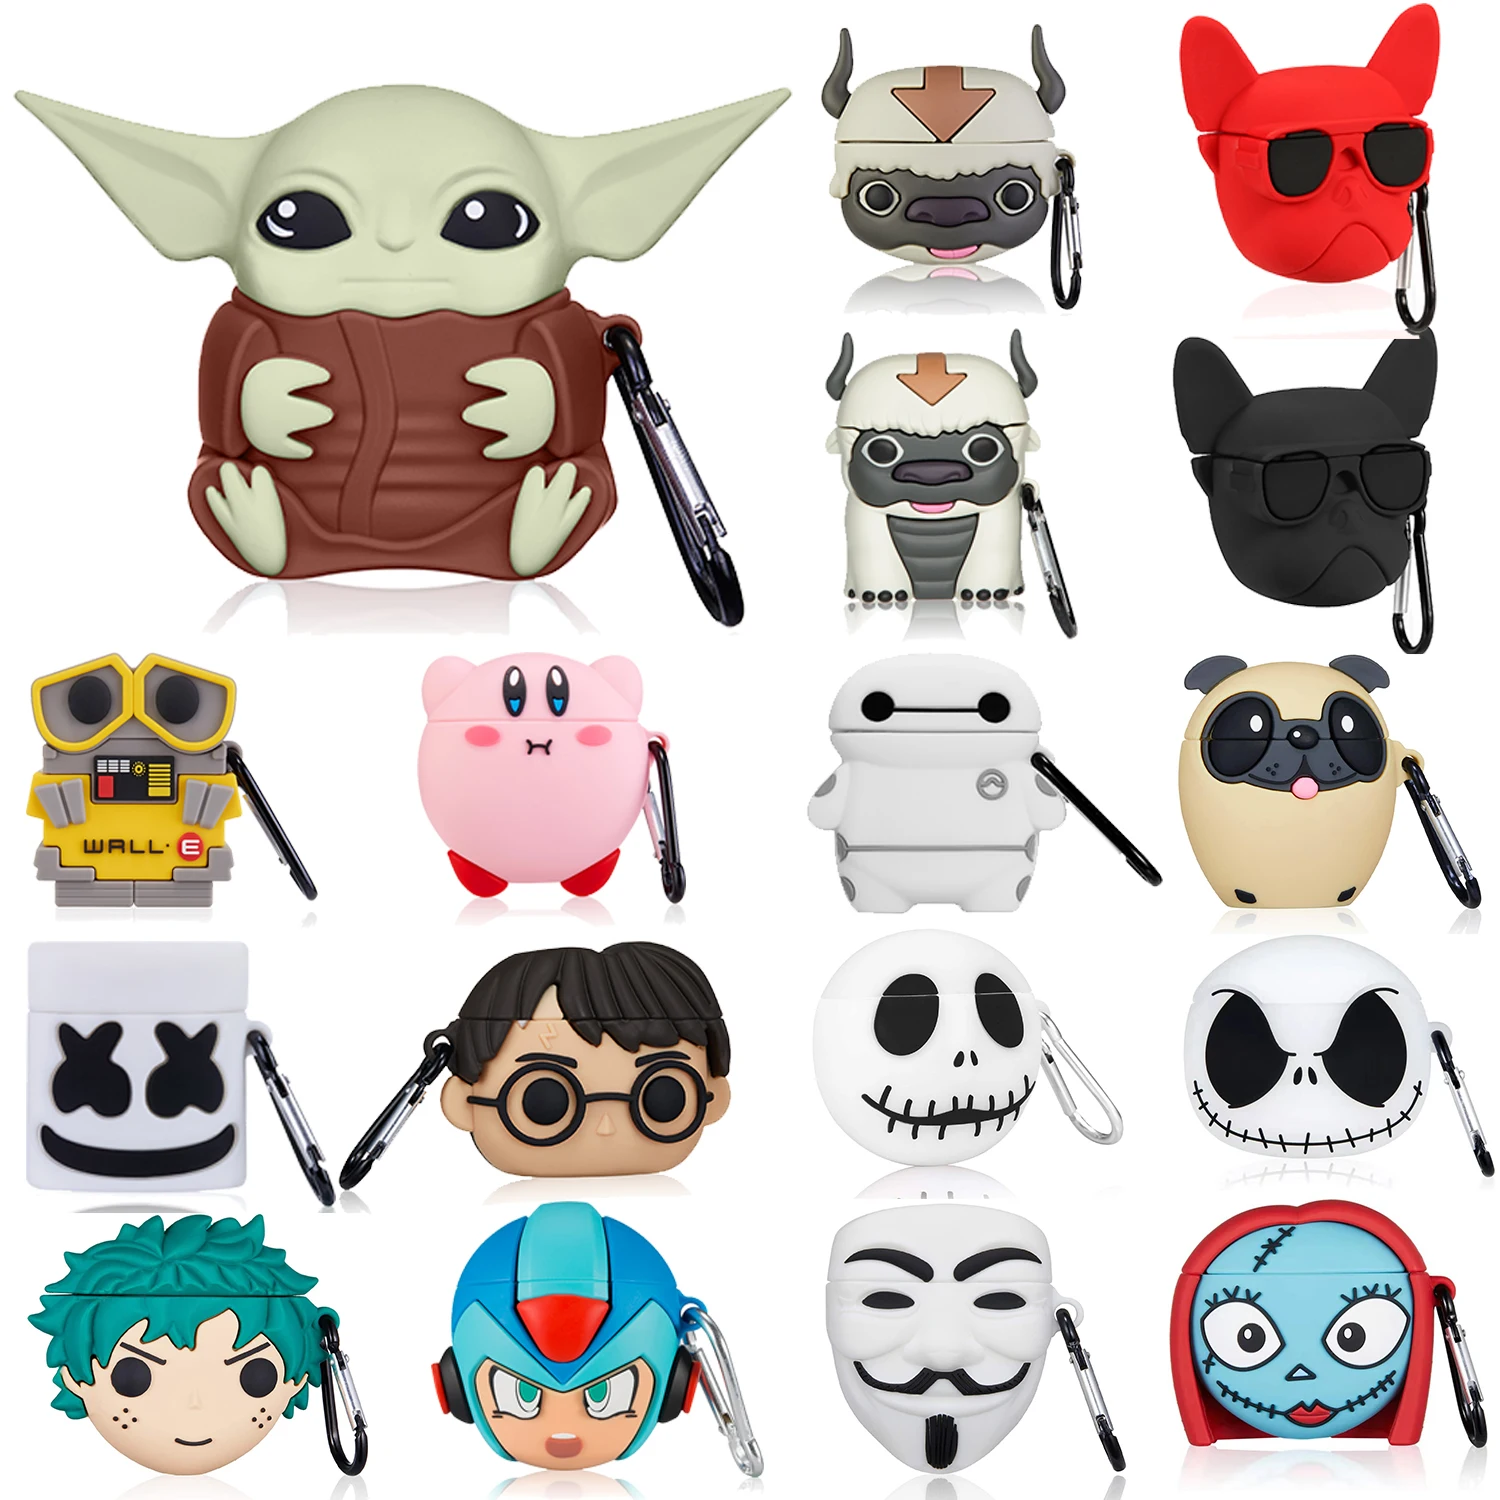 

Gemfits Silicone 3d Case for Airpod 2 Case Cute Cartoon for Airpods Pro Cover Character Design For Anime Airpod Case, Multiple colors